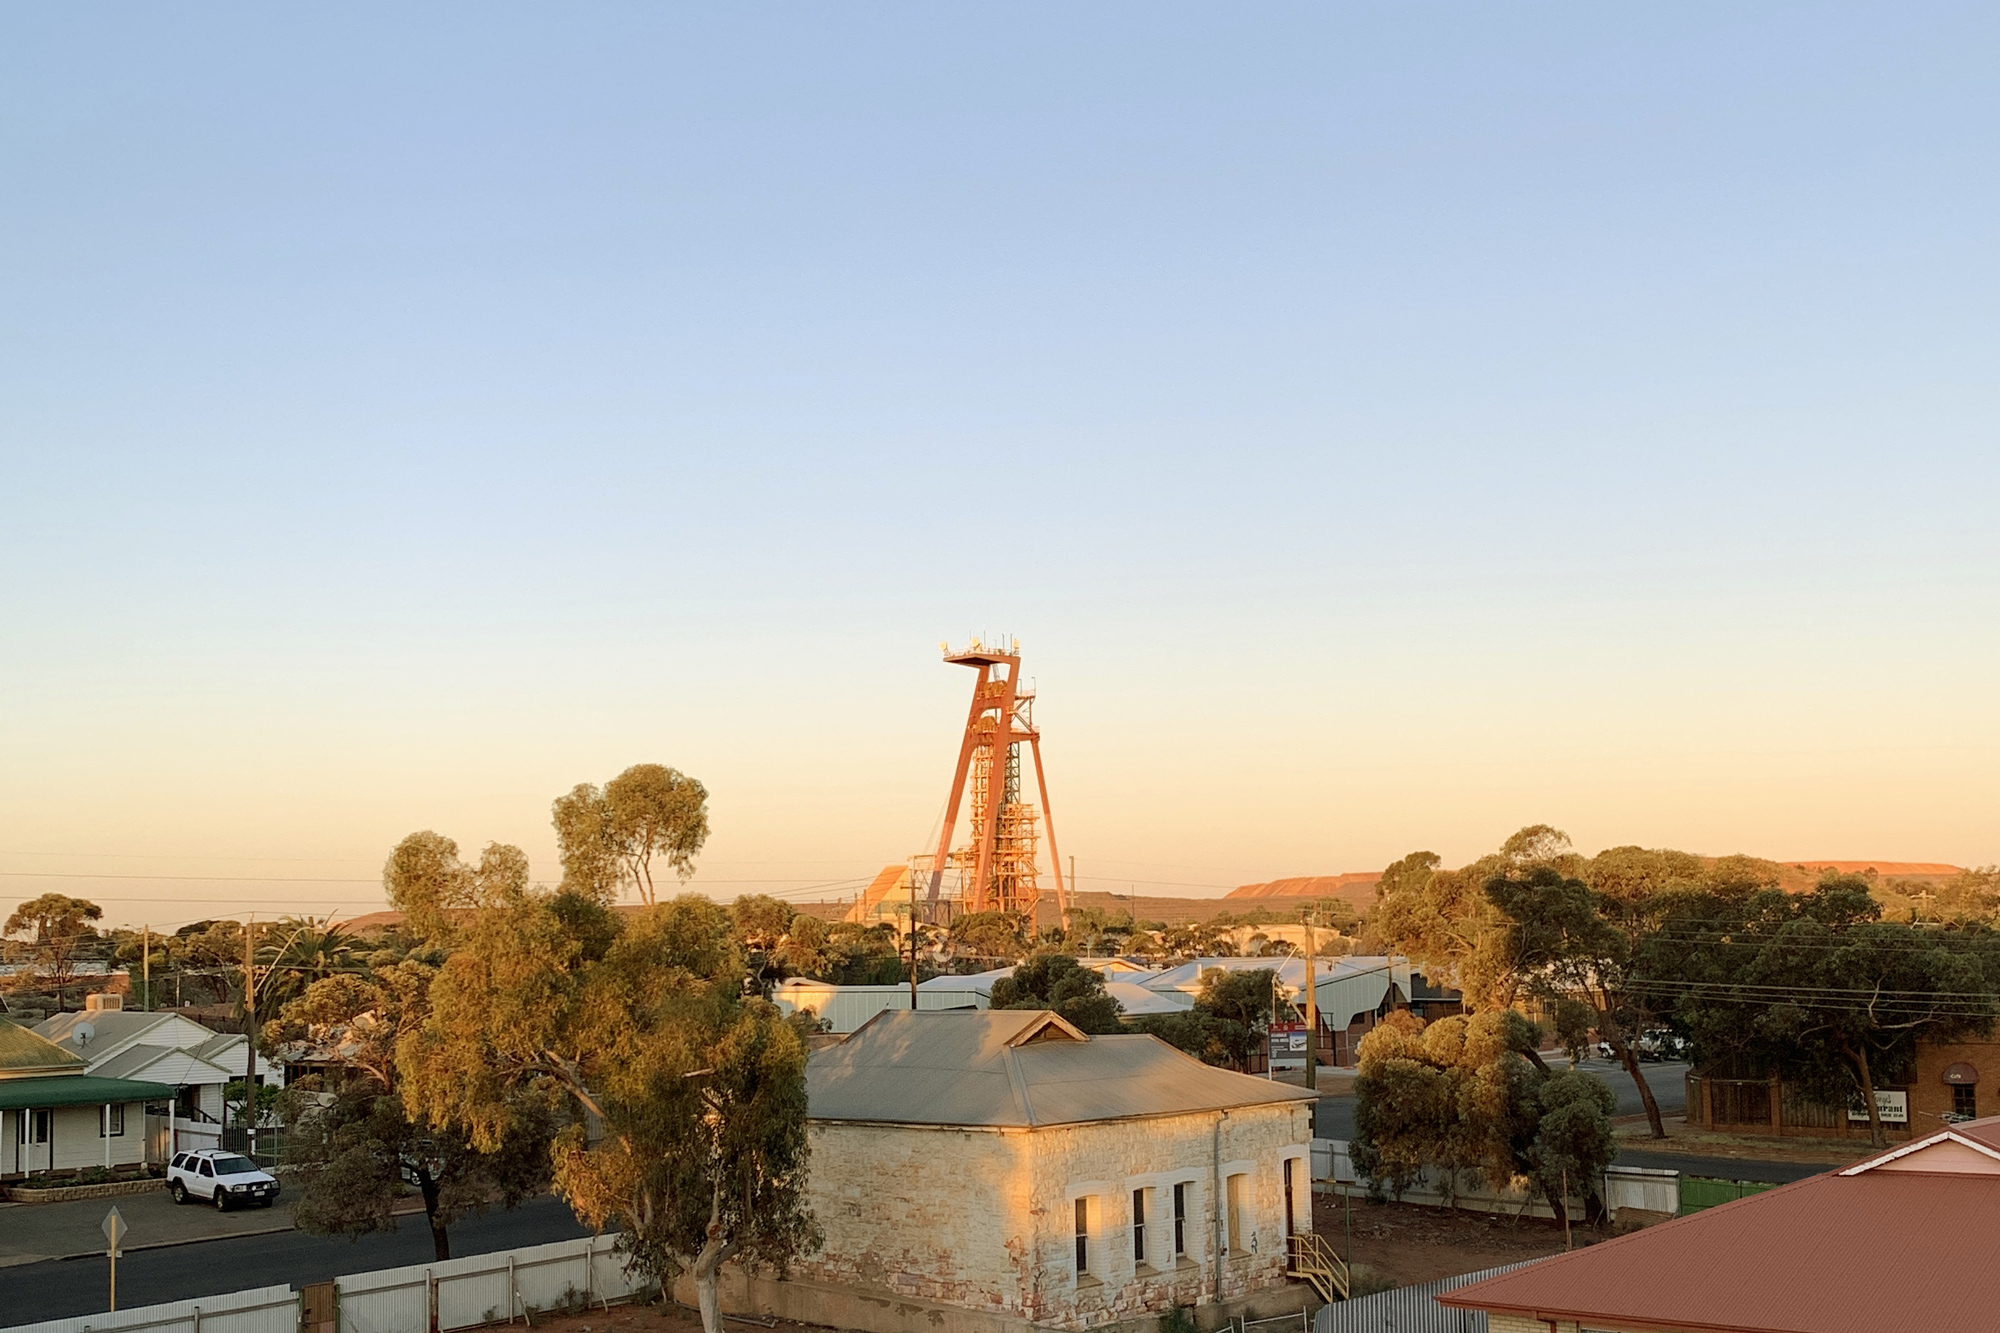 A view of Kalgoorlie's skyline during sunset